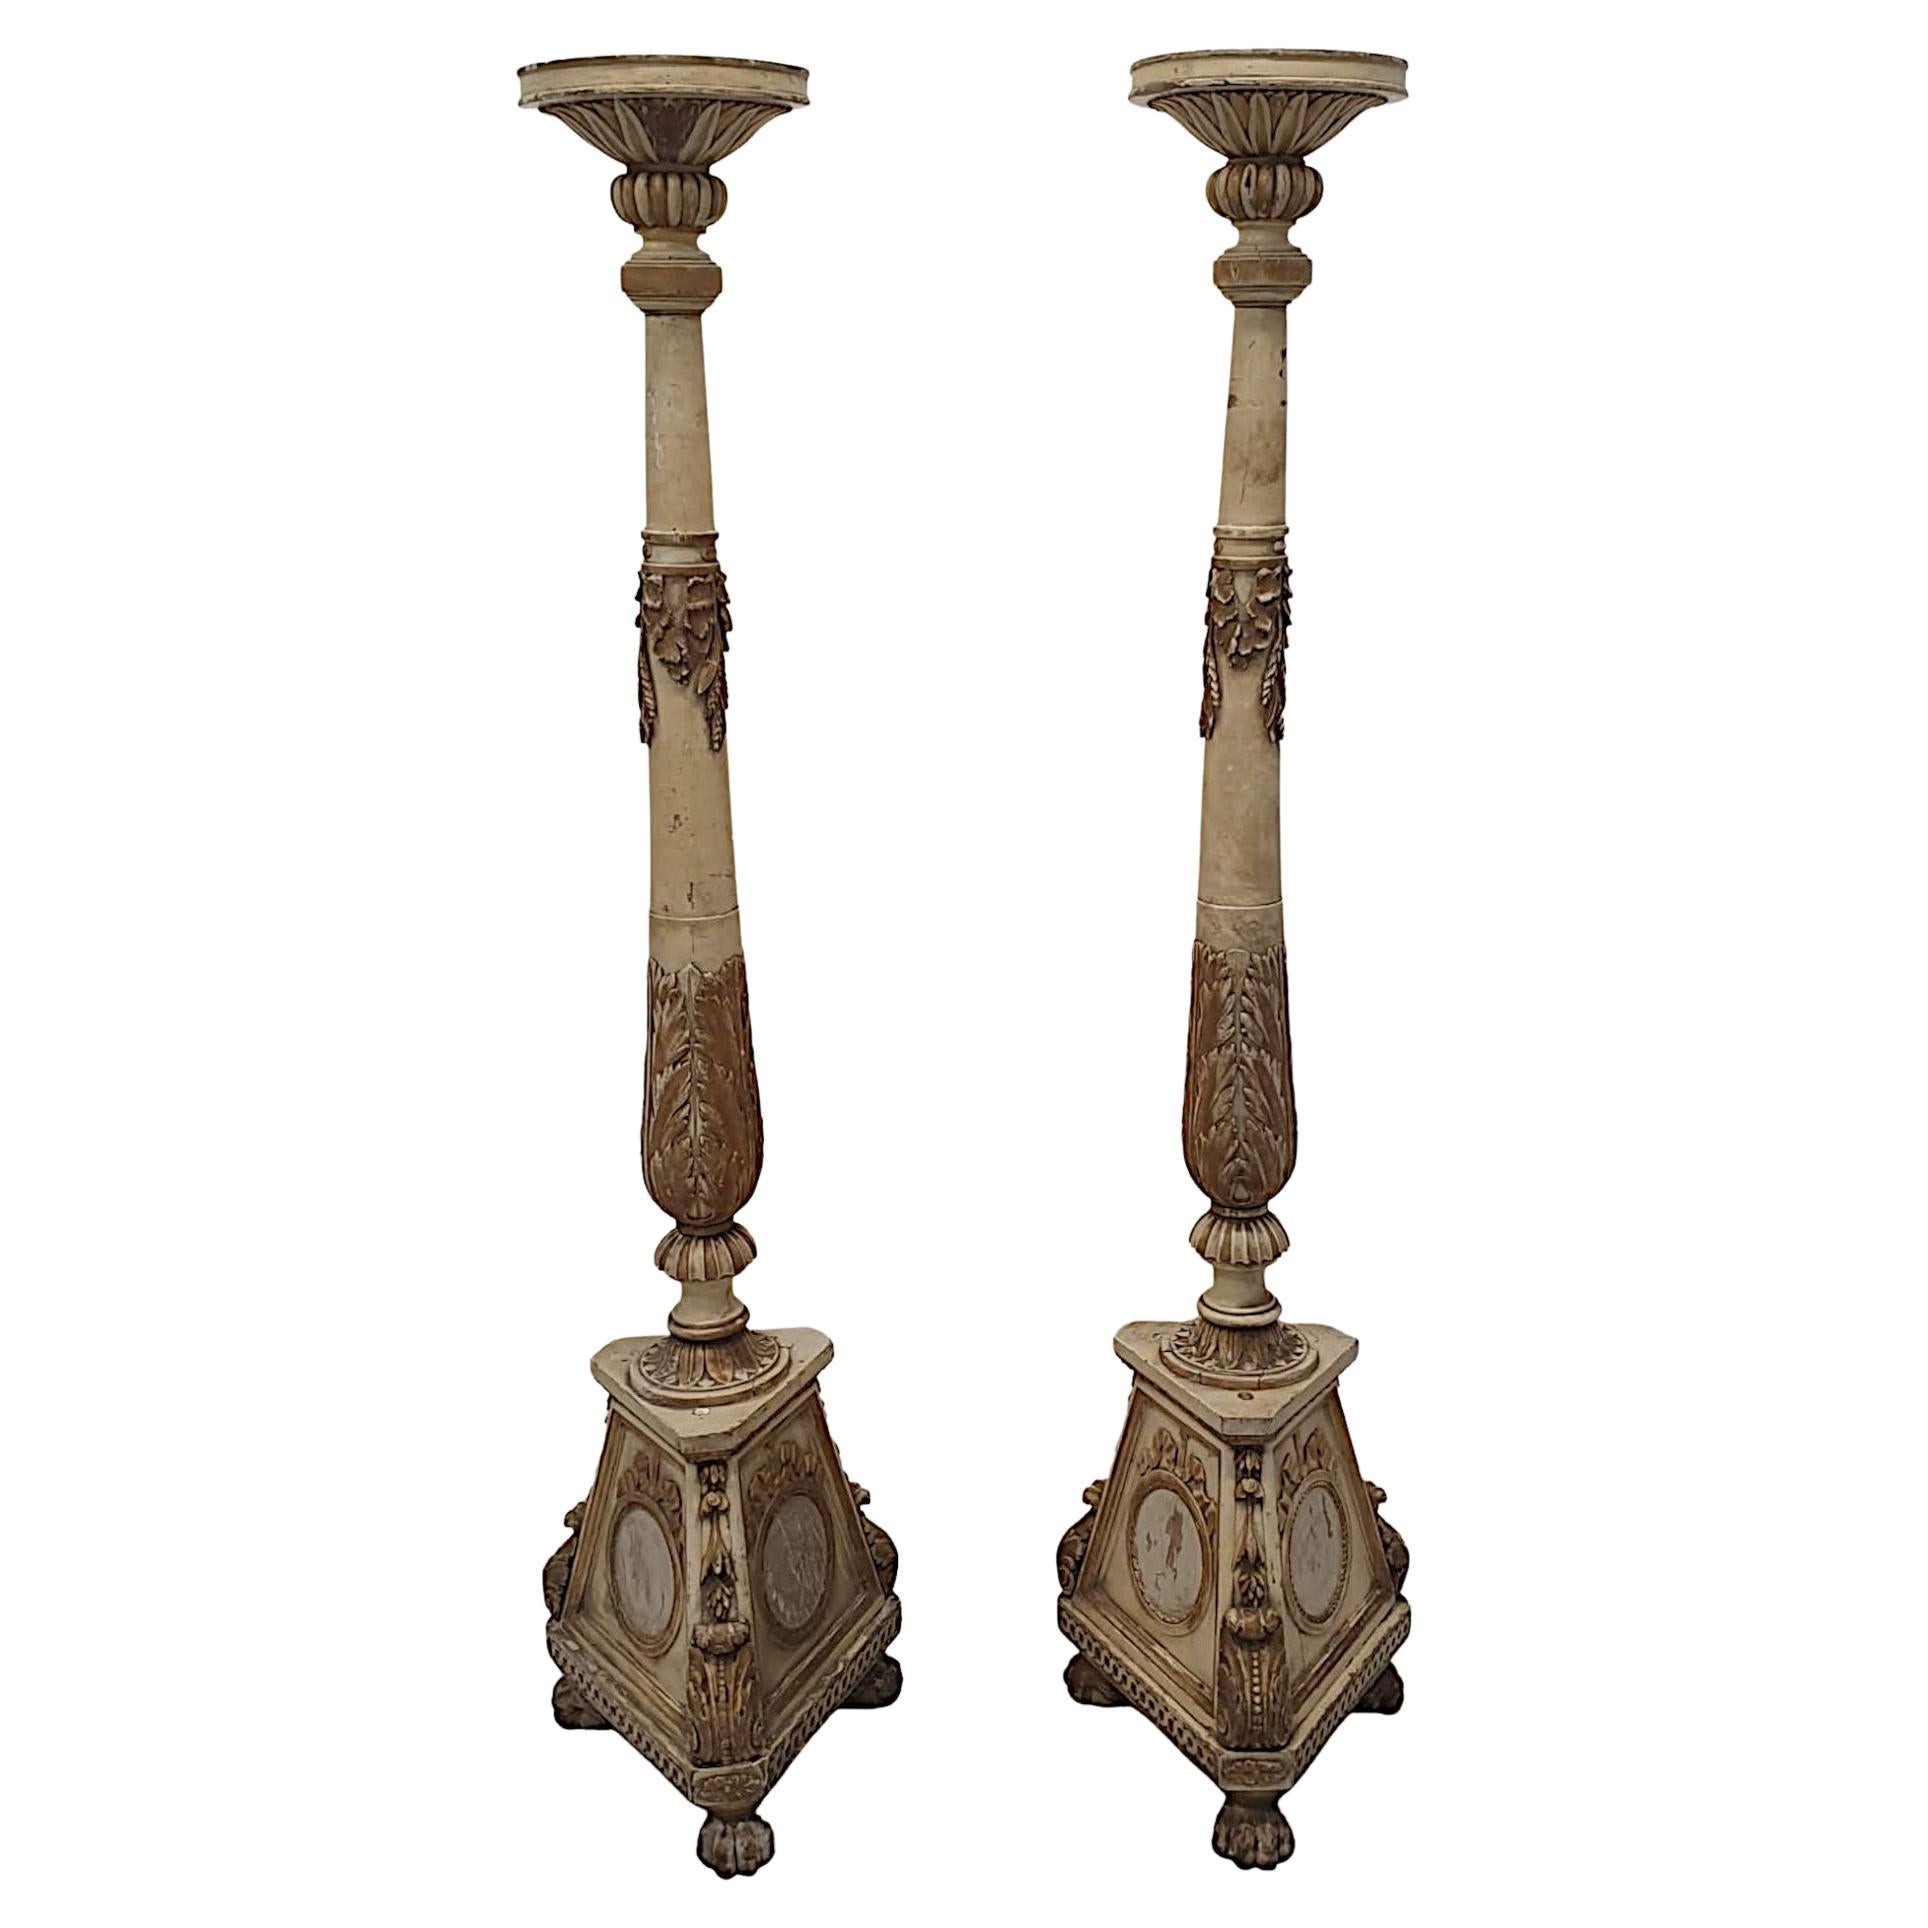 Very Rare and Unusual Pair of 19th Century Parcel Gilt Torcheres